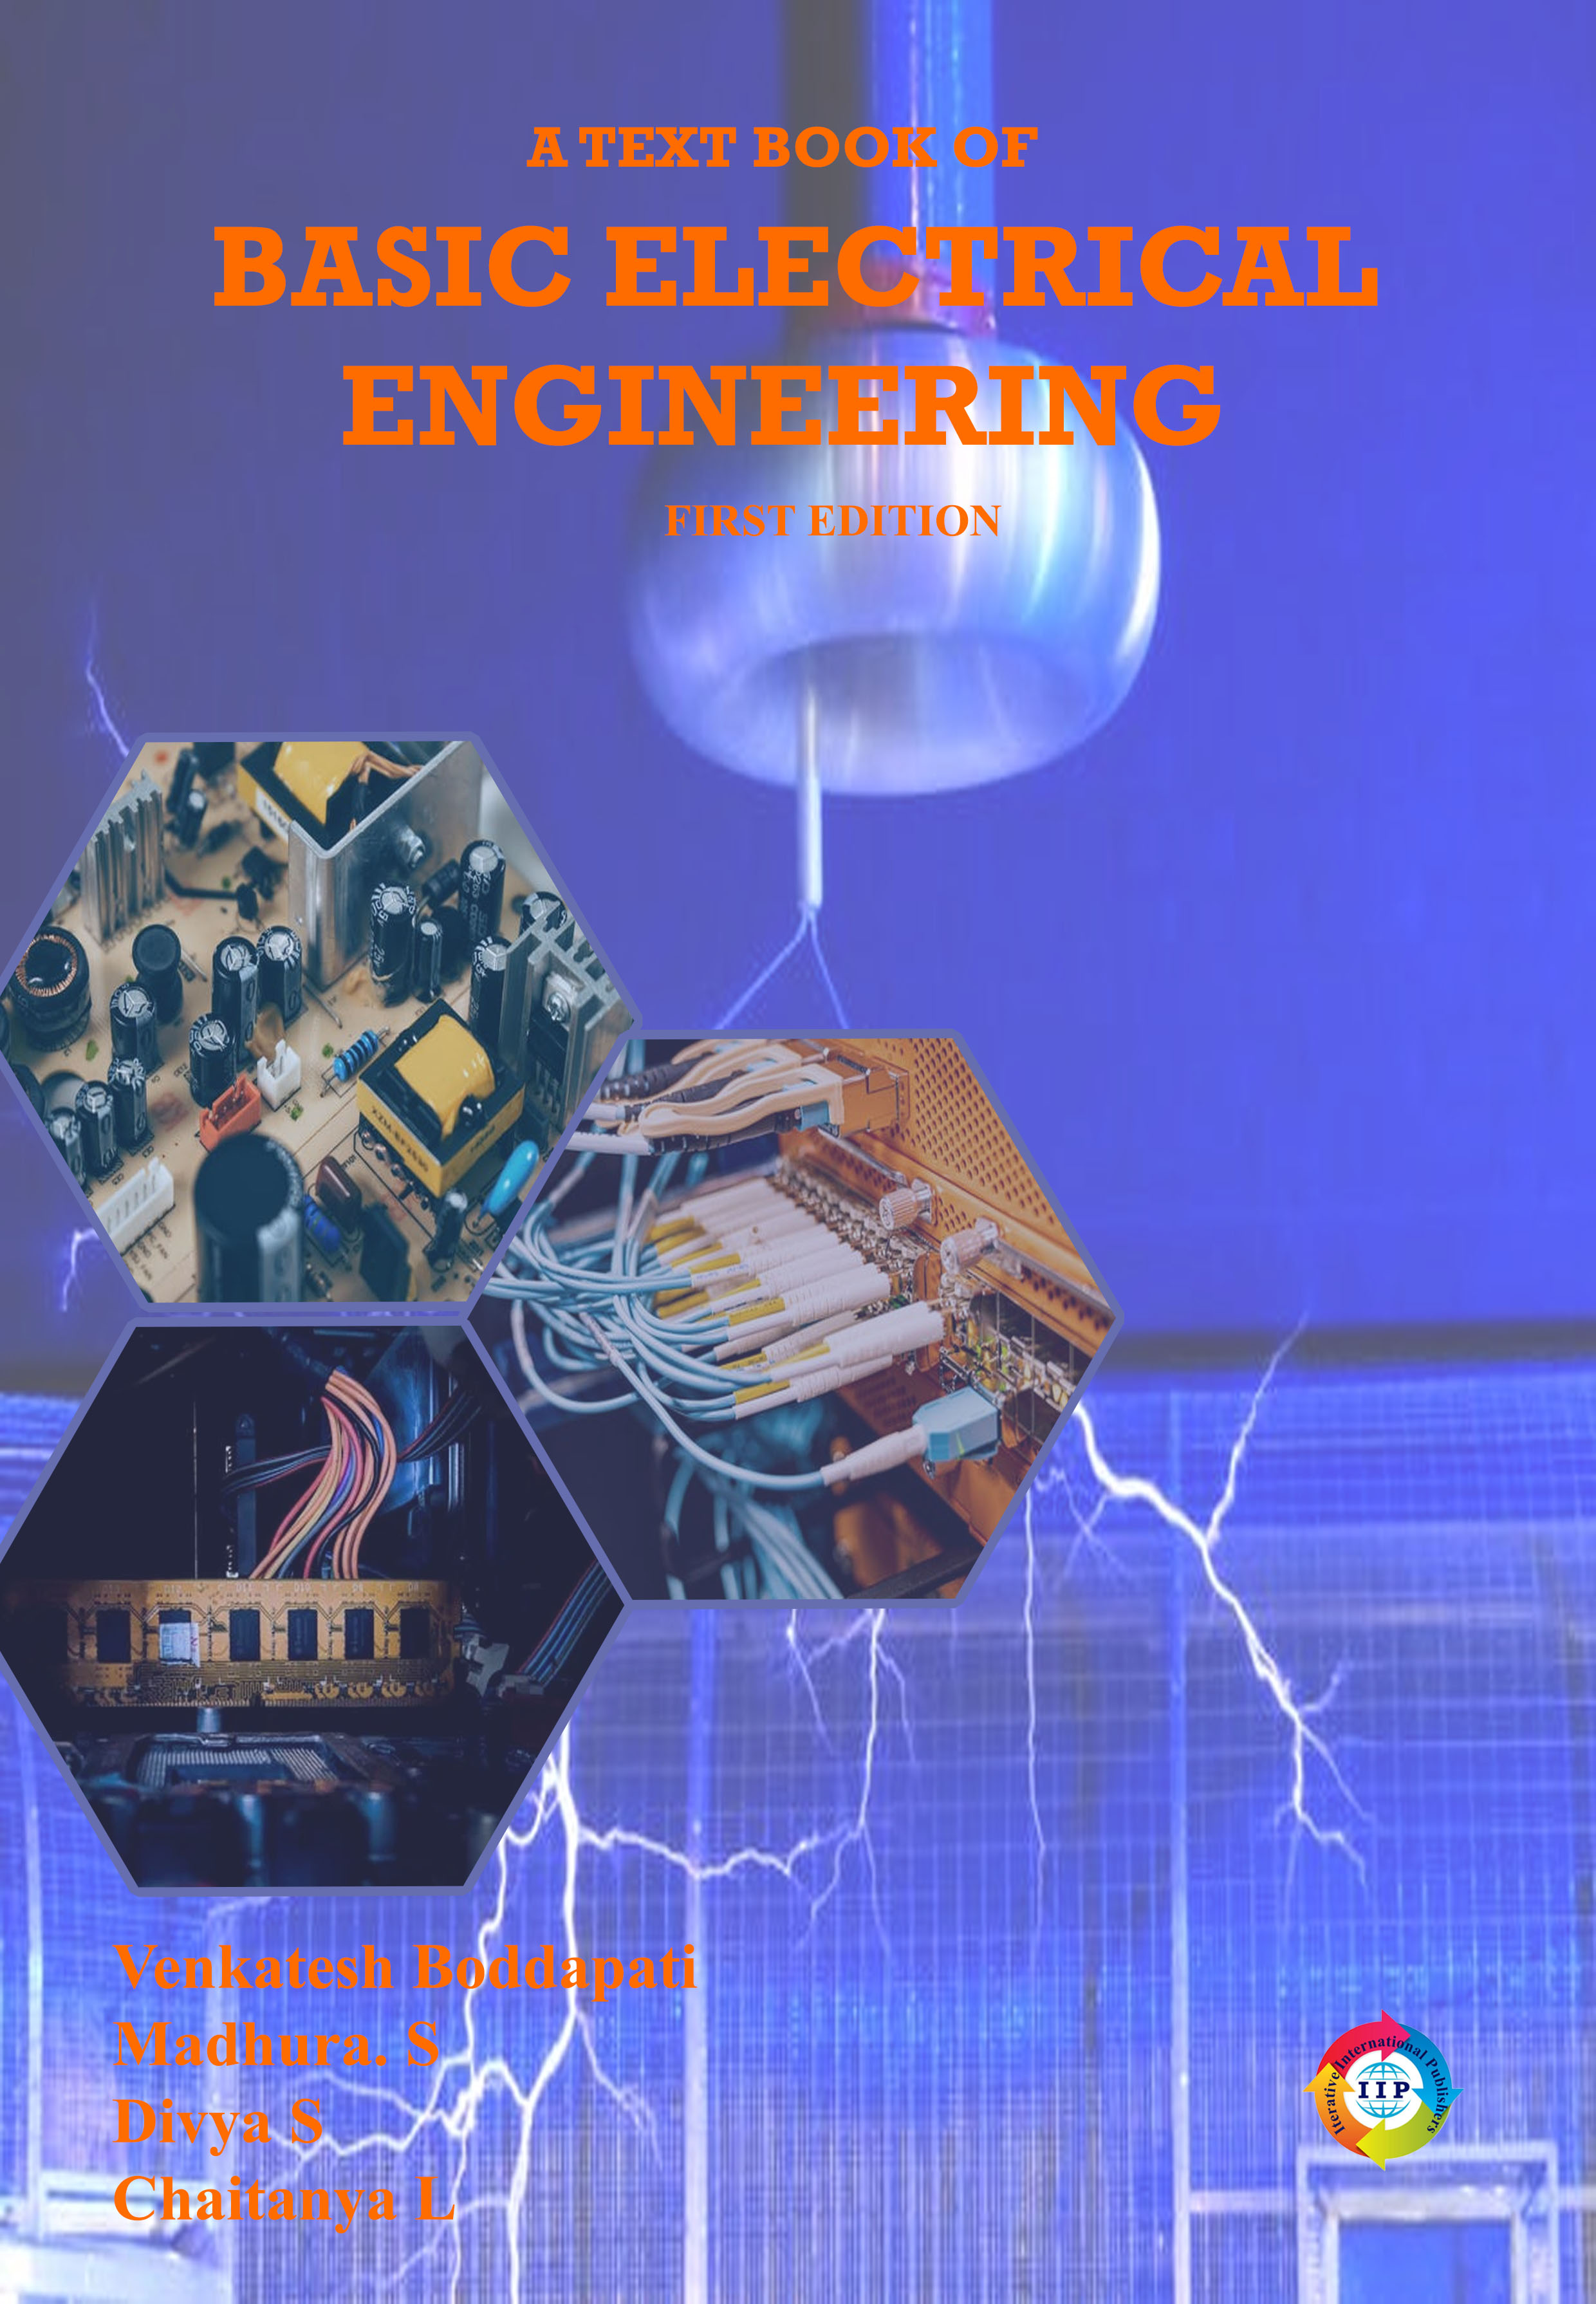 A TEXT BOOK OF  BASIC ELECTRICAL ENGINEERING